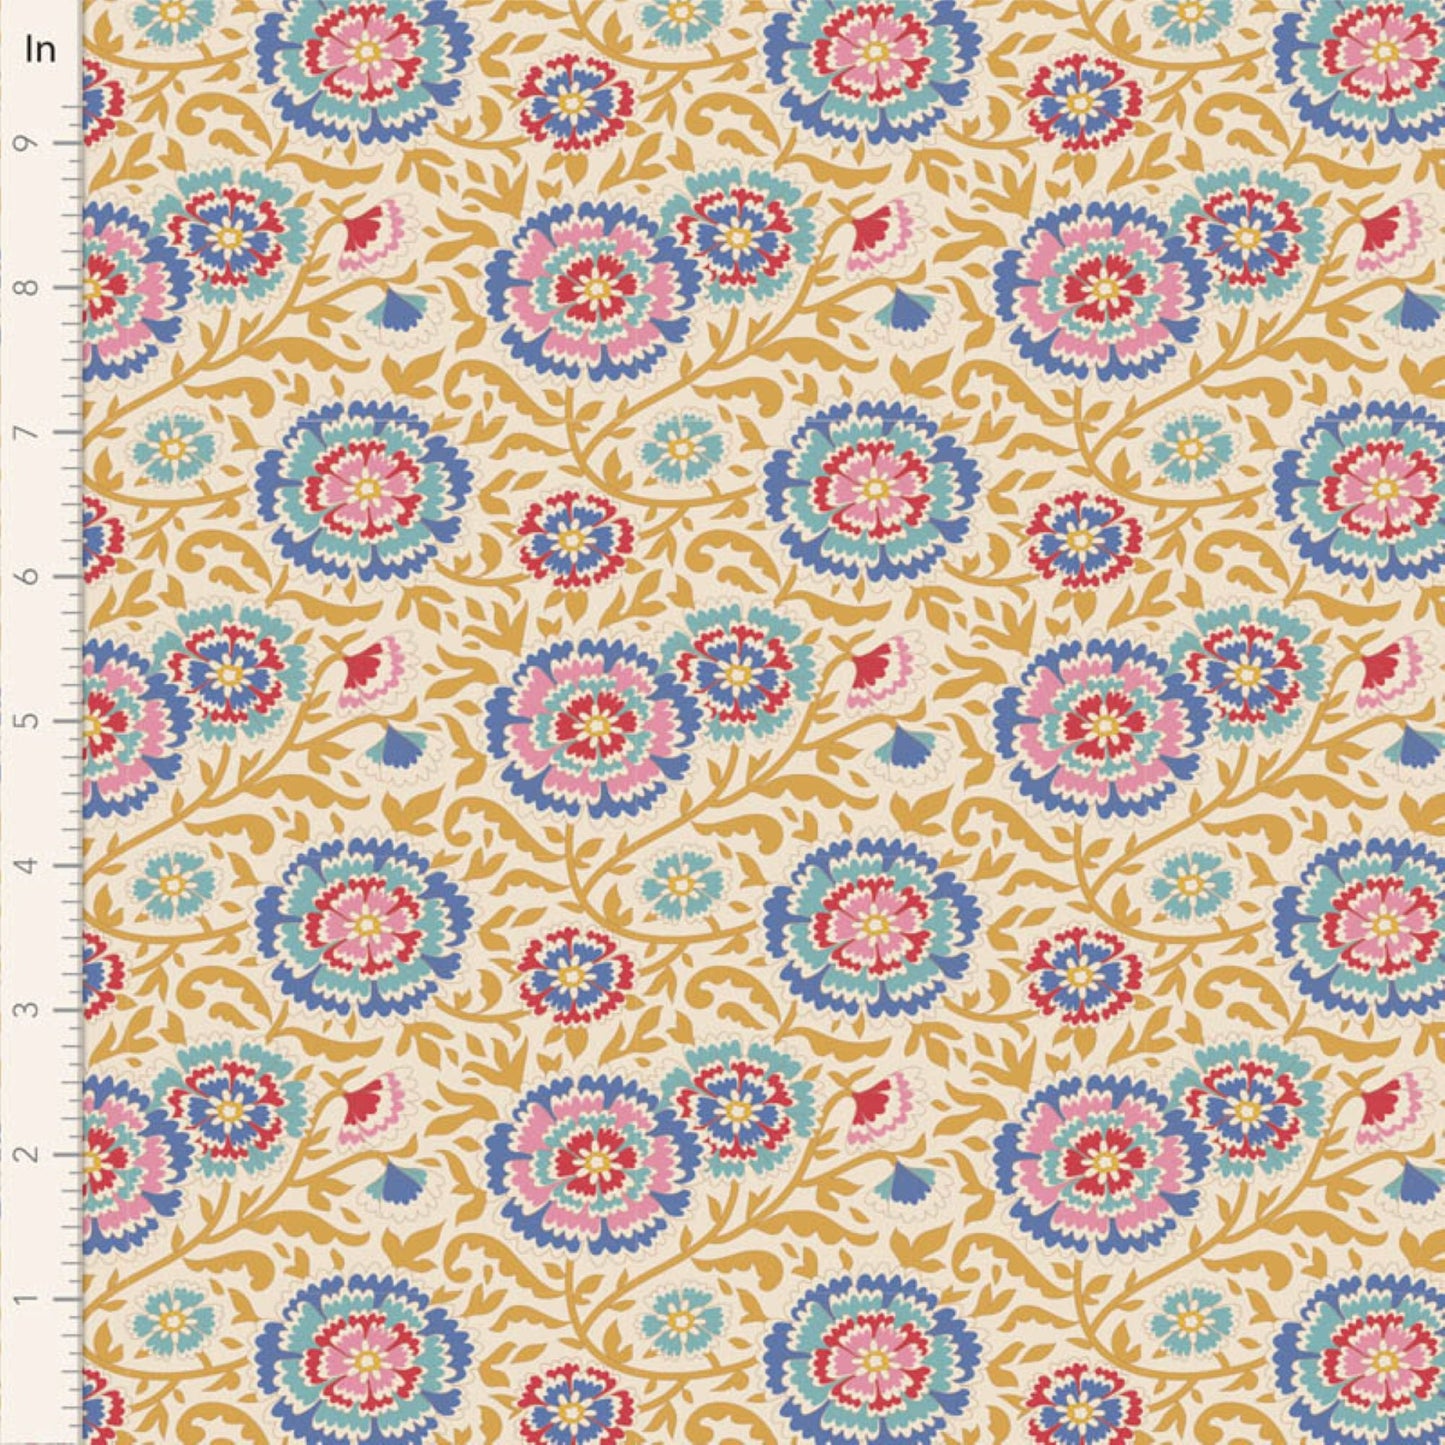 Tilda Jubilee and Farm Flowers floral mustard yellow and pink bundle 7 Fat Eighths cotton quilt fabric